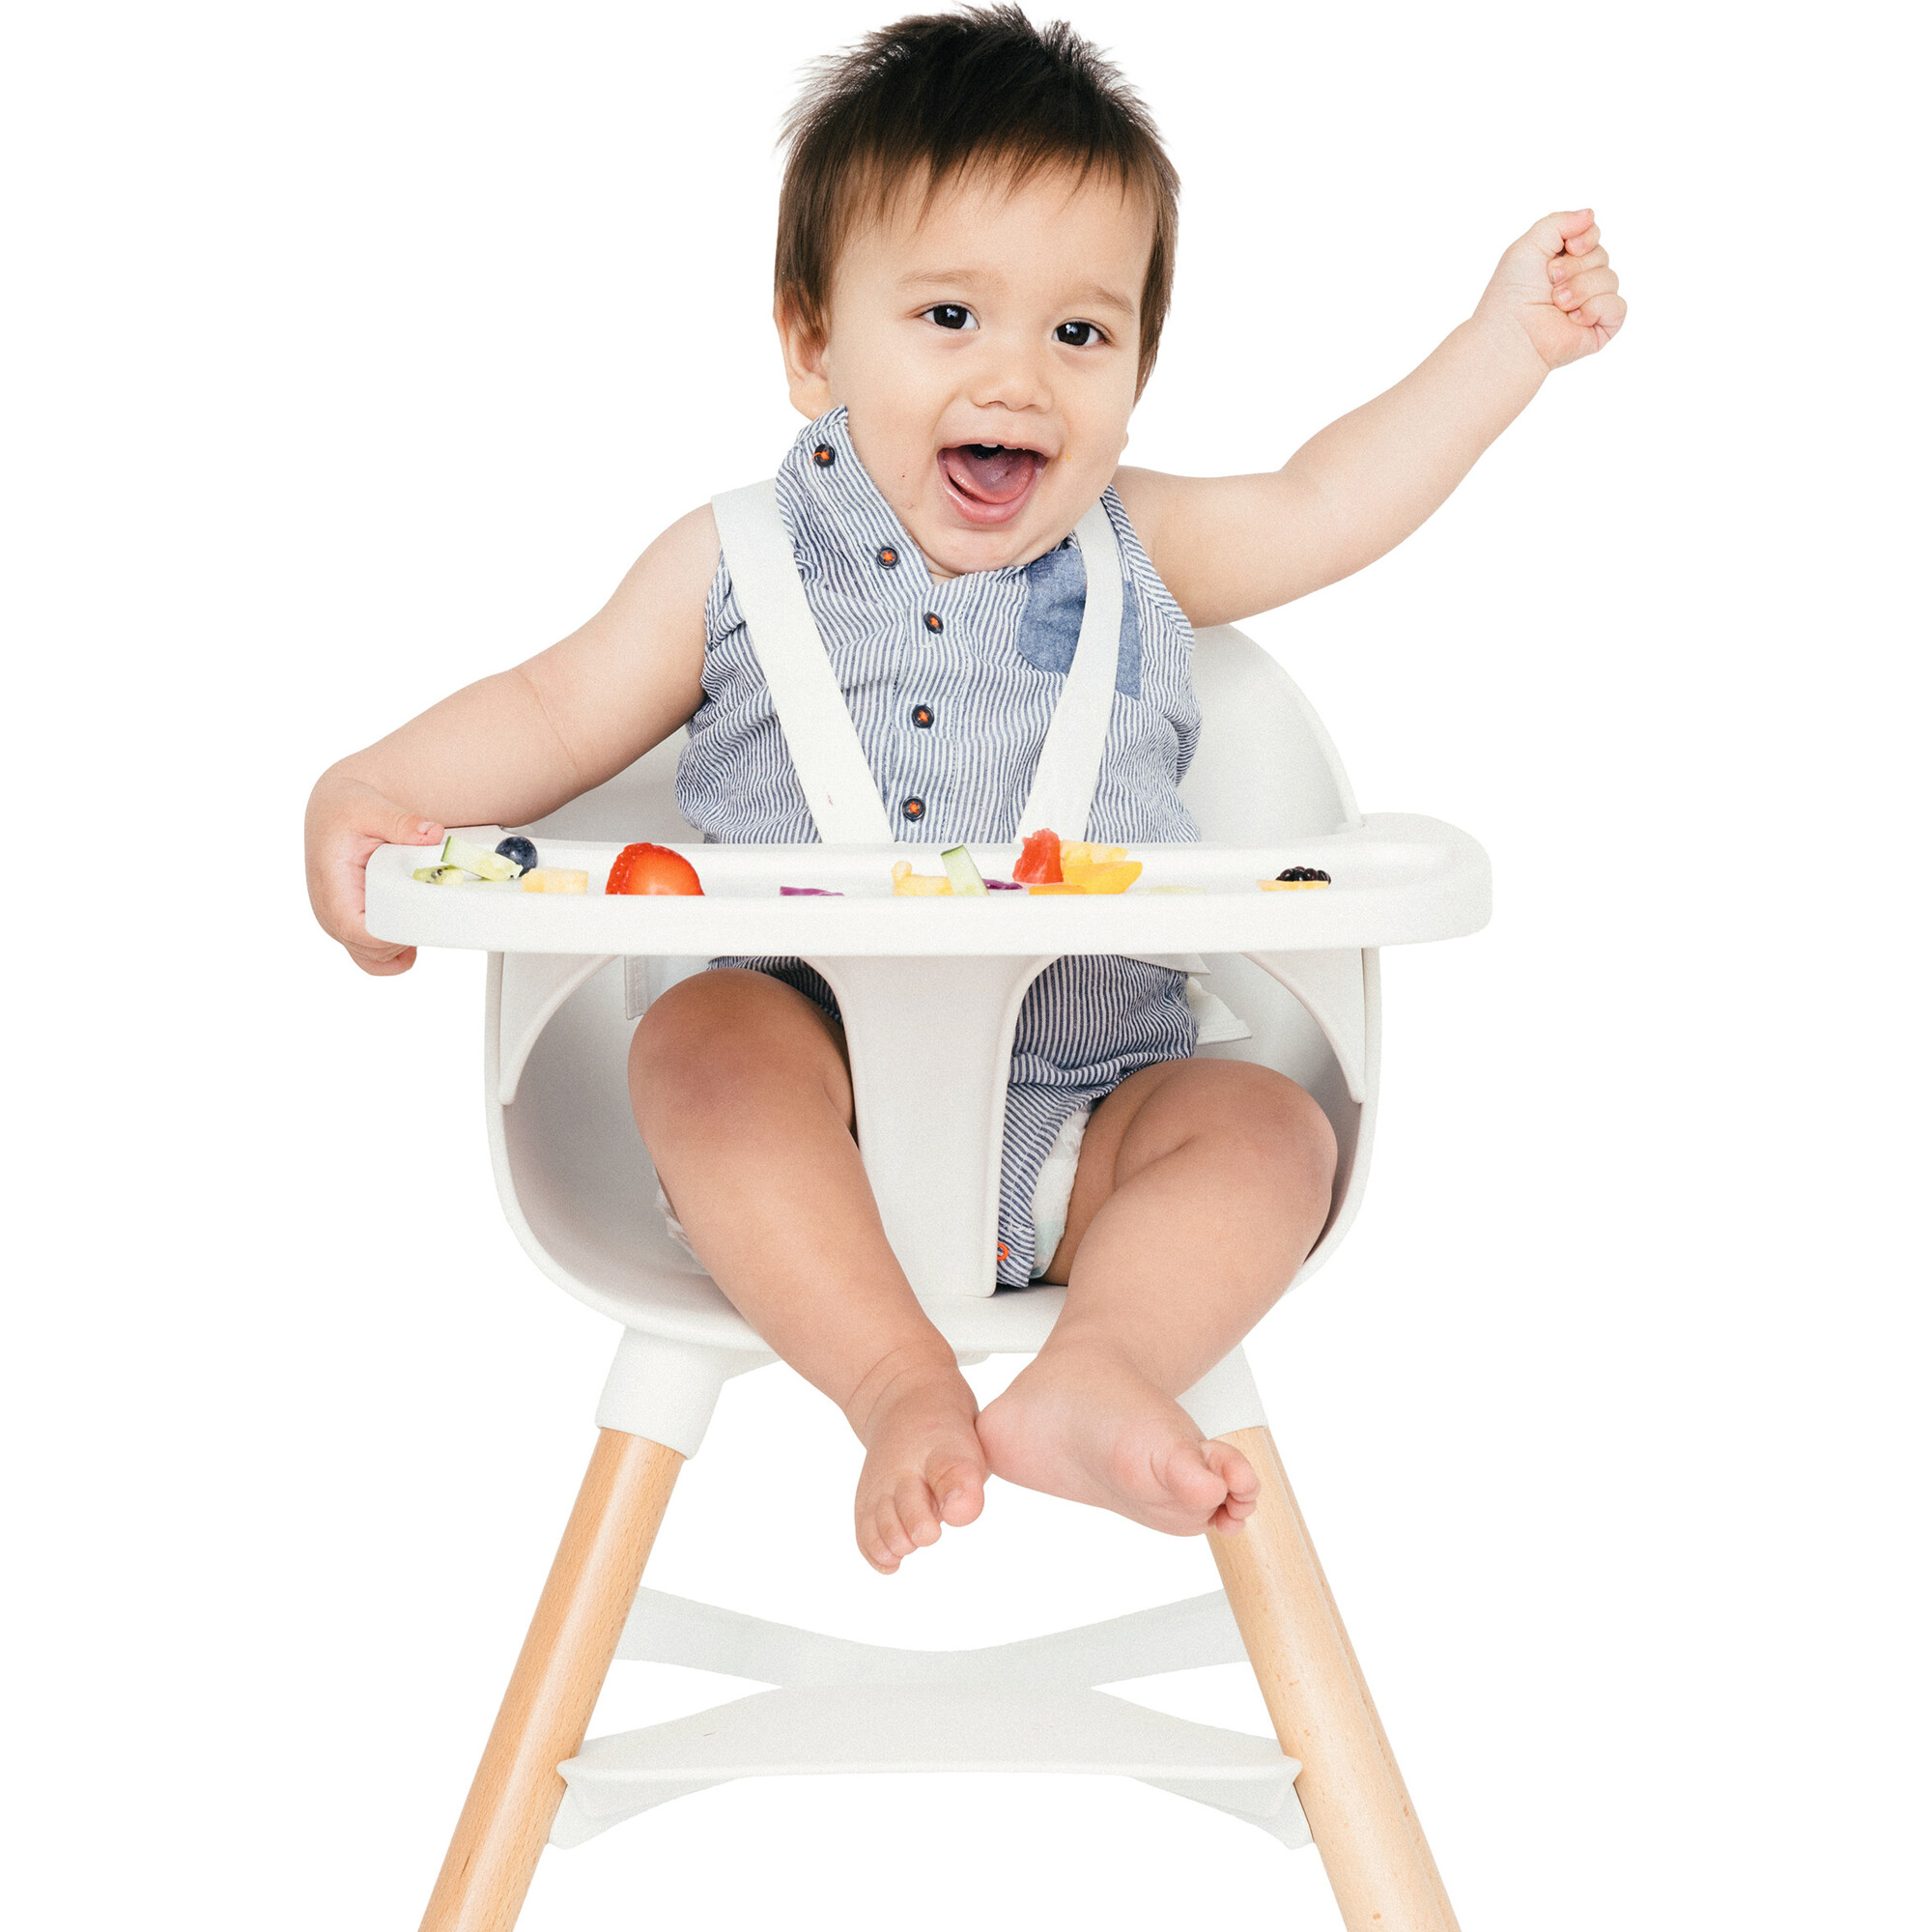 Lalo High Chair + First Bites Full Kit in Coconut/Oatmeal Size 24.5 x 24.5 x 33